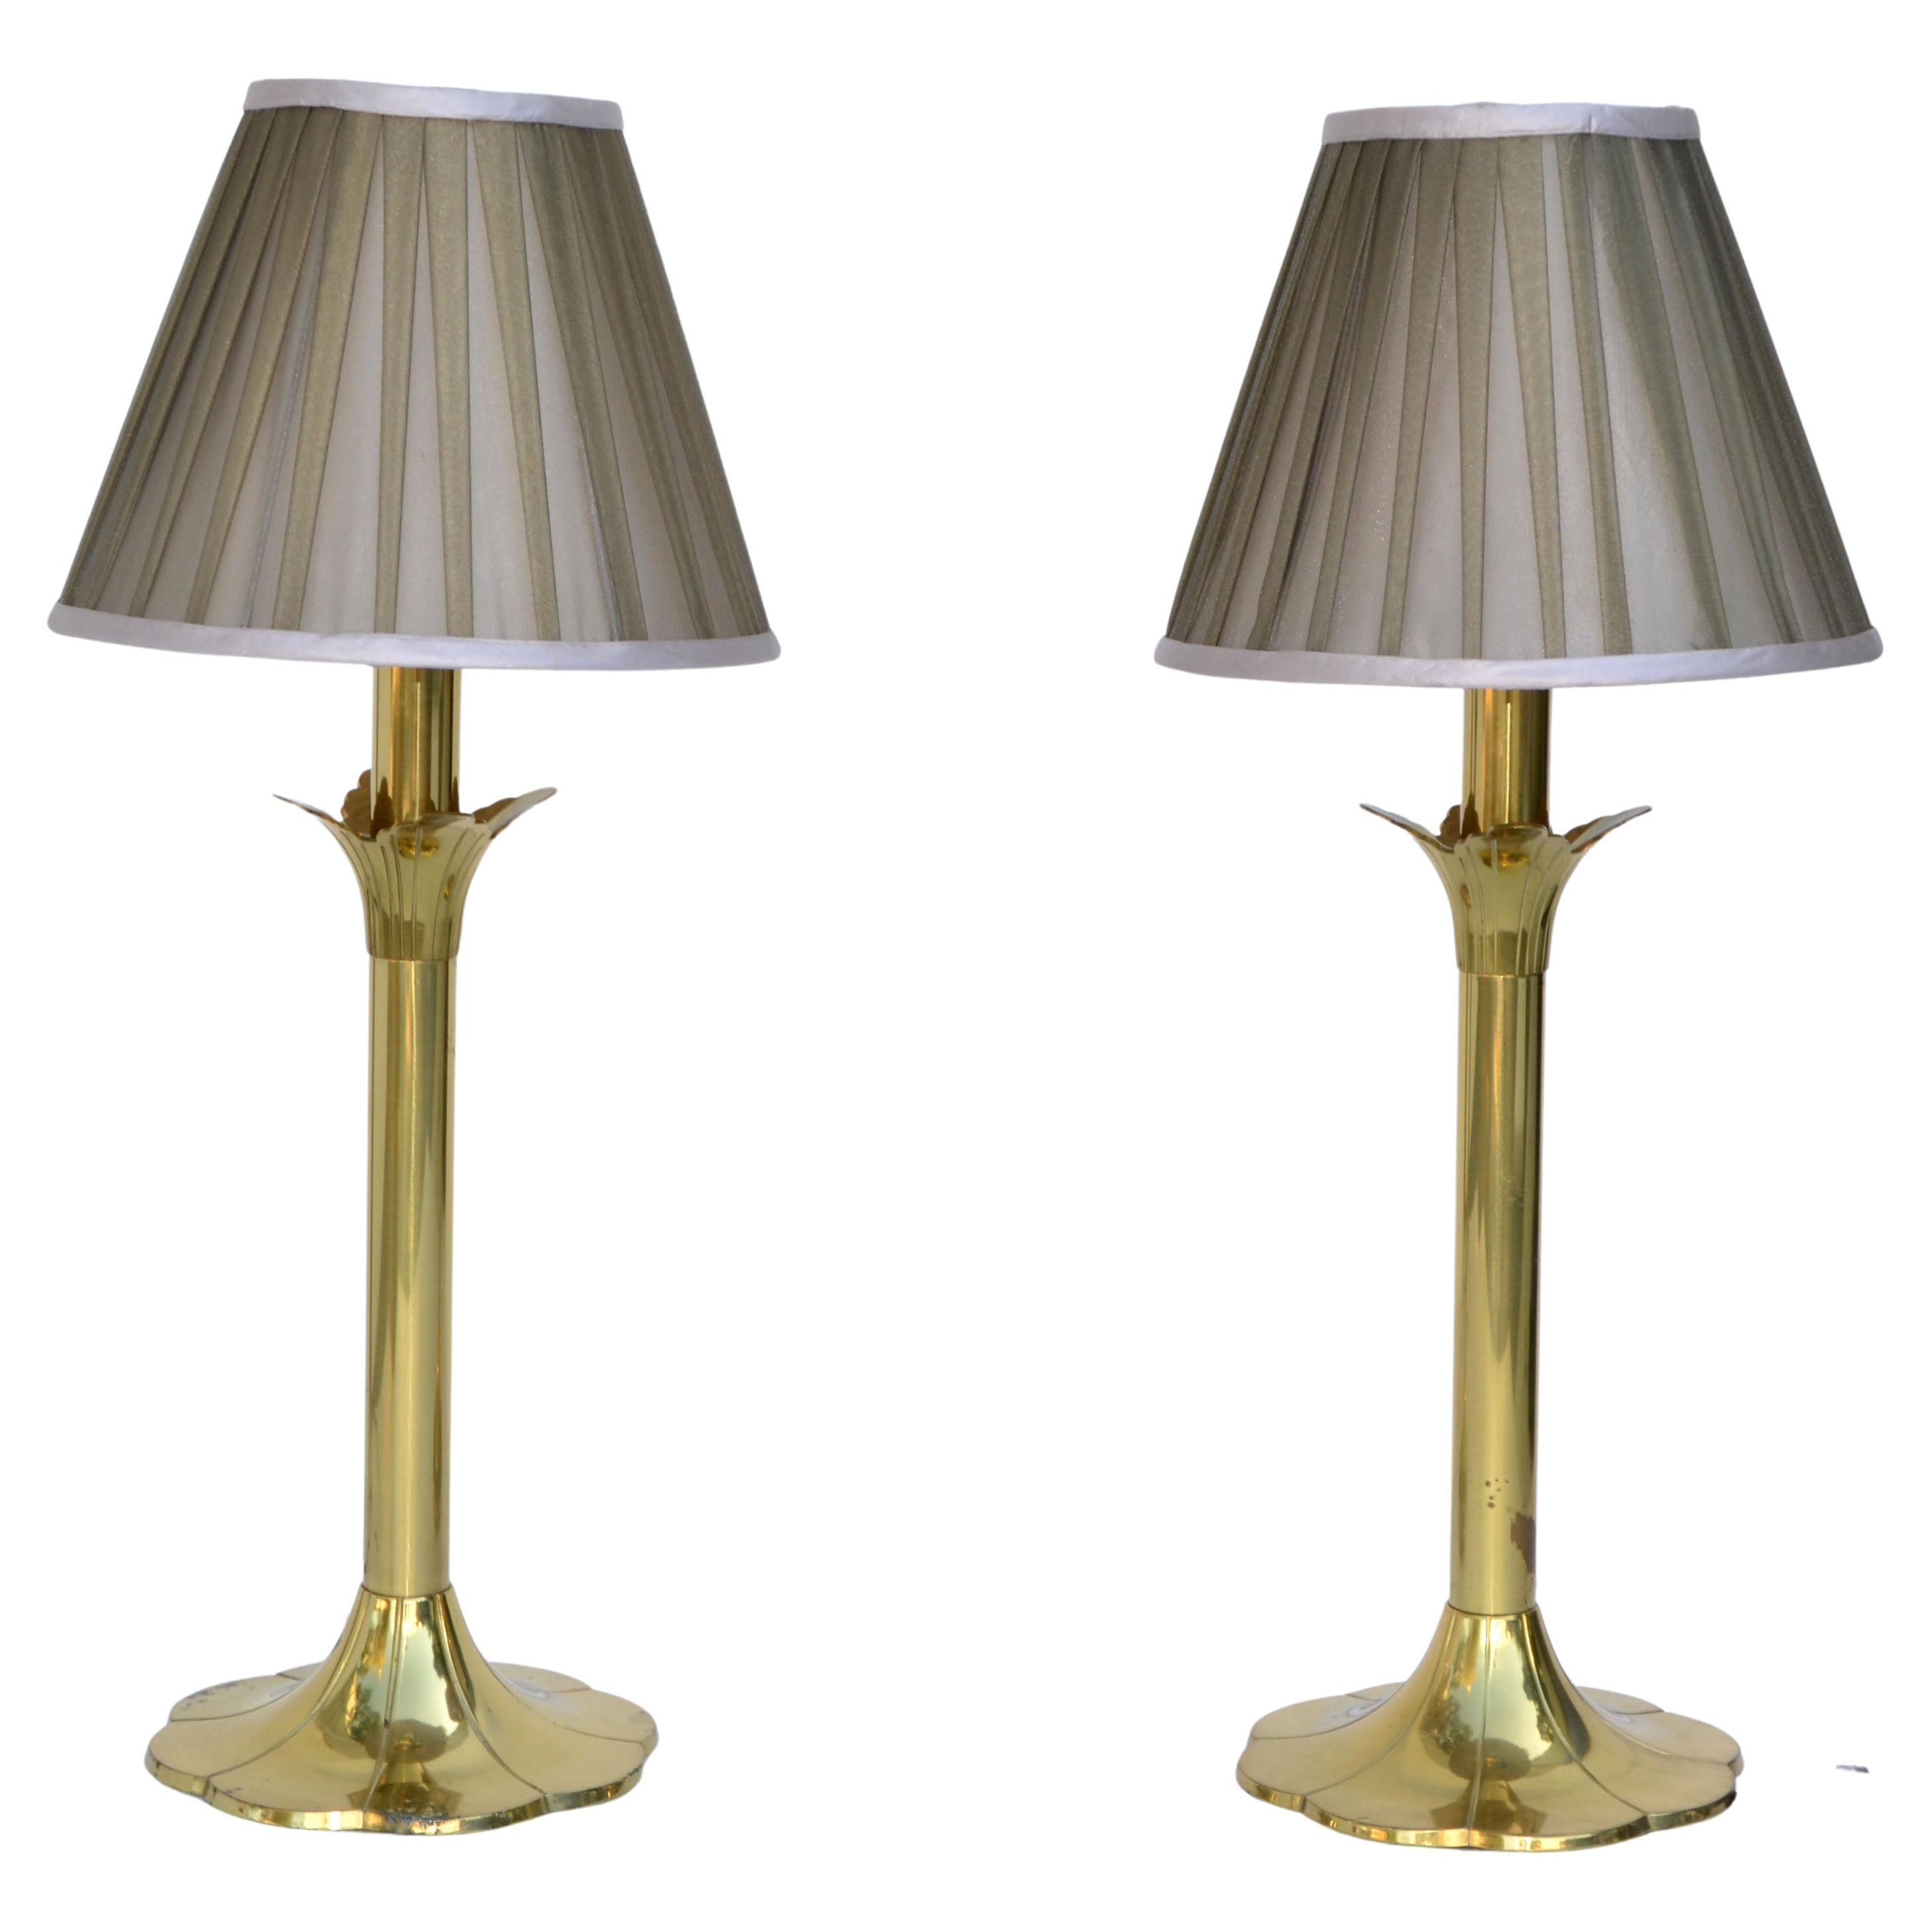 Pair of Stiffel Brass Table Lamps & Shades Mid-Century Modern American 1990